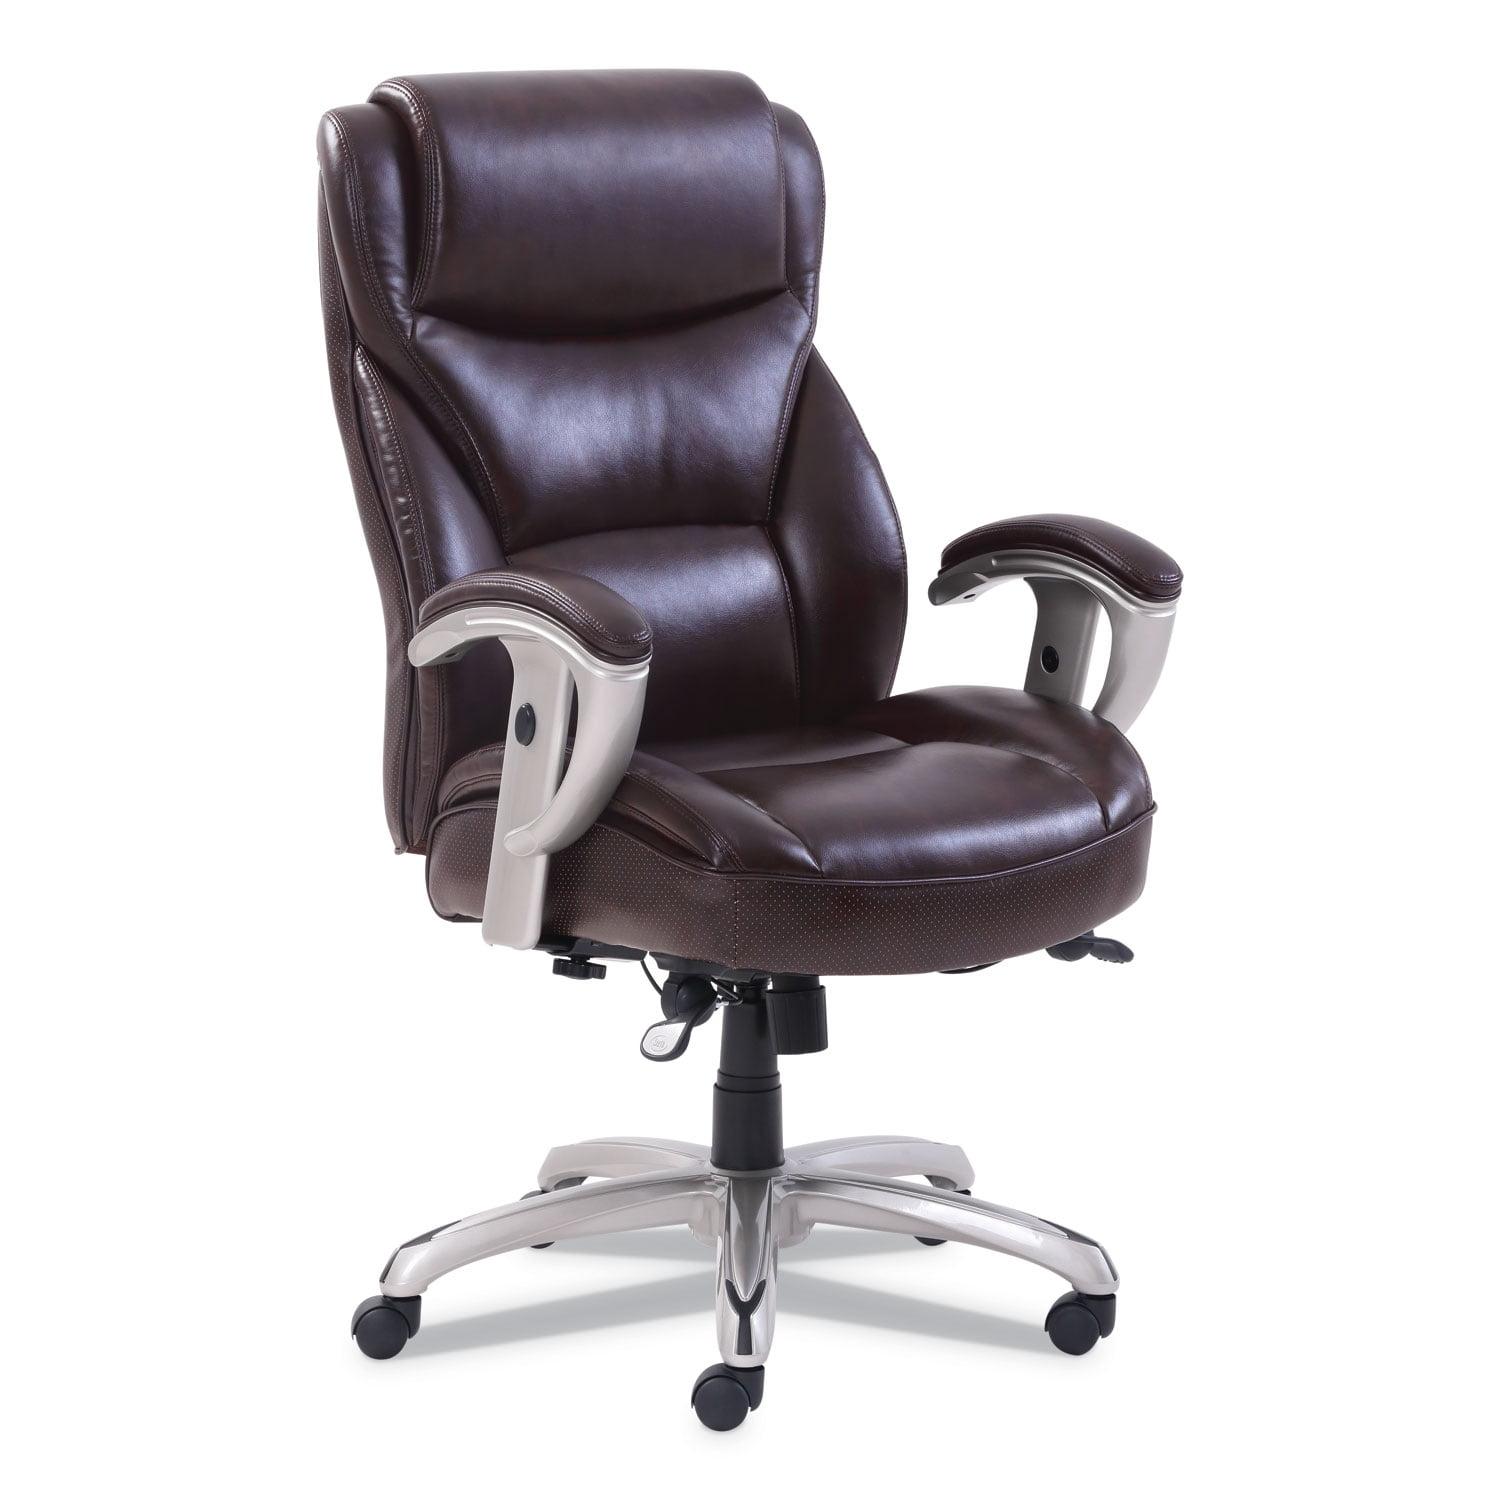 Emerson High-Back Swivel Task Chair in Premium Brown Leather